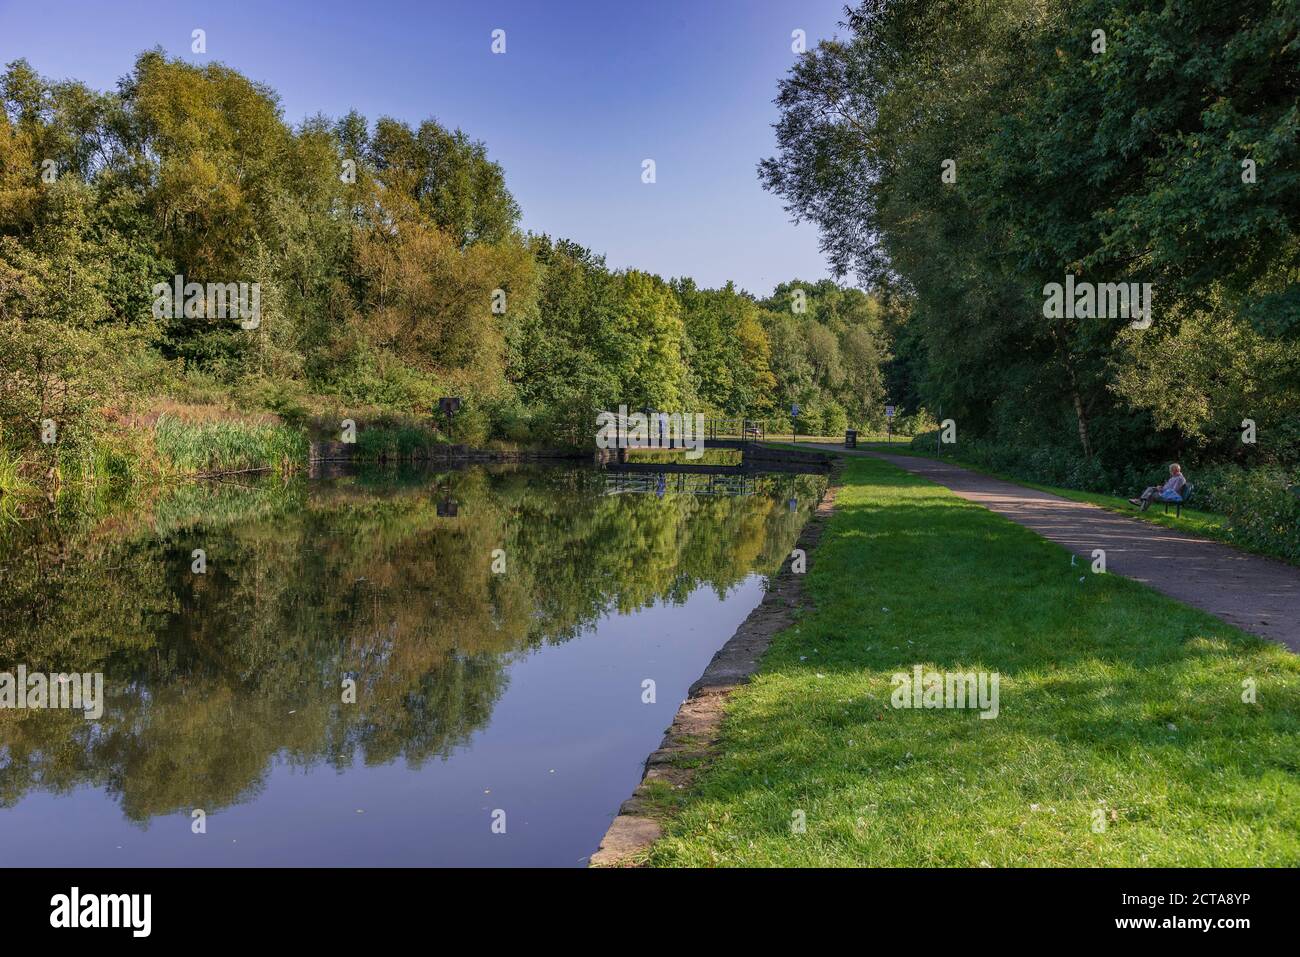 The old canal in Sankey Valley park at Earlestown. The park is a linear country park that runs fom Widnes to Haydock. Stock Photo